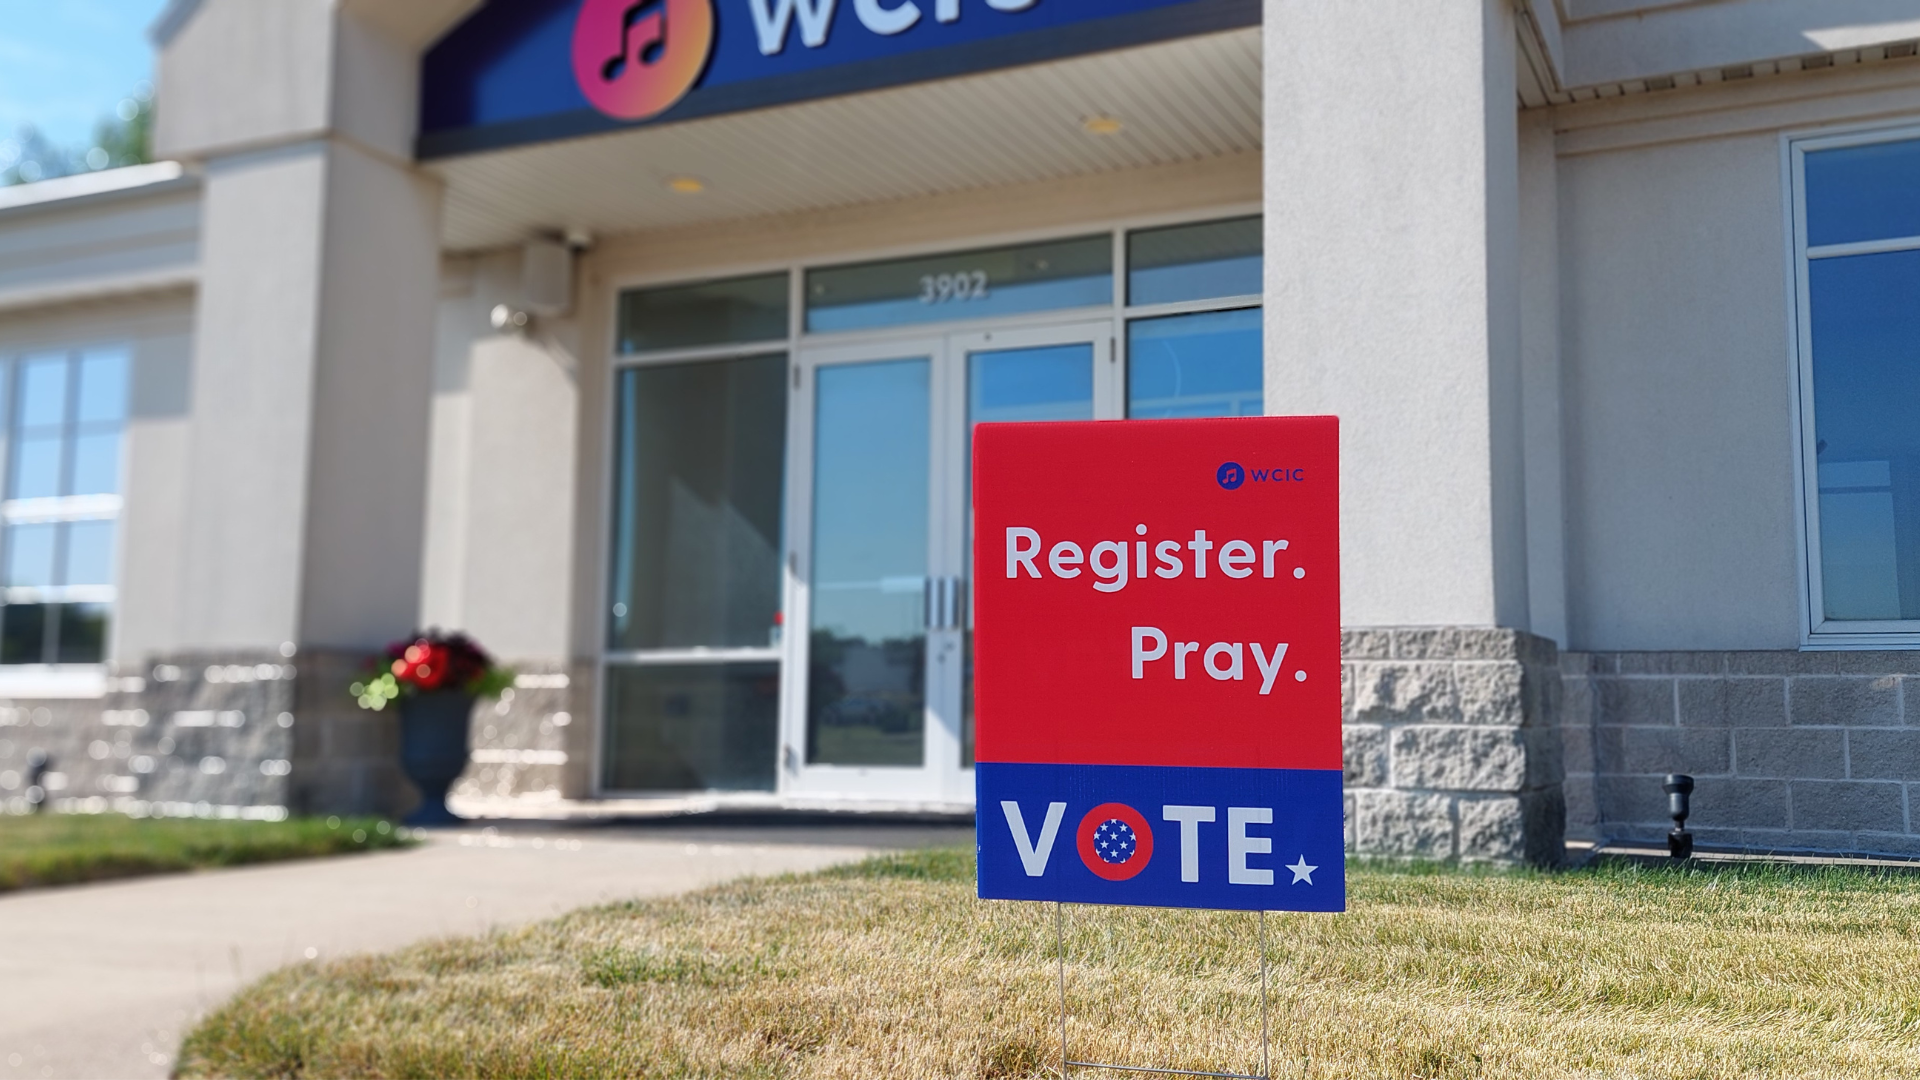 A picture of front of WCIC studios and a Yard sign that says Register Pray Vote